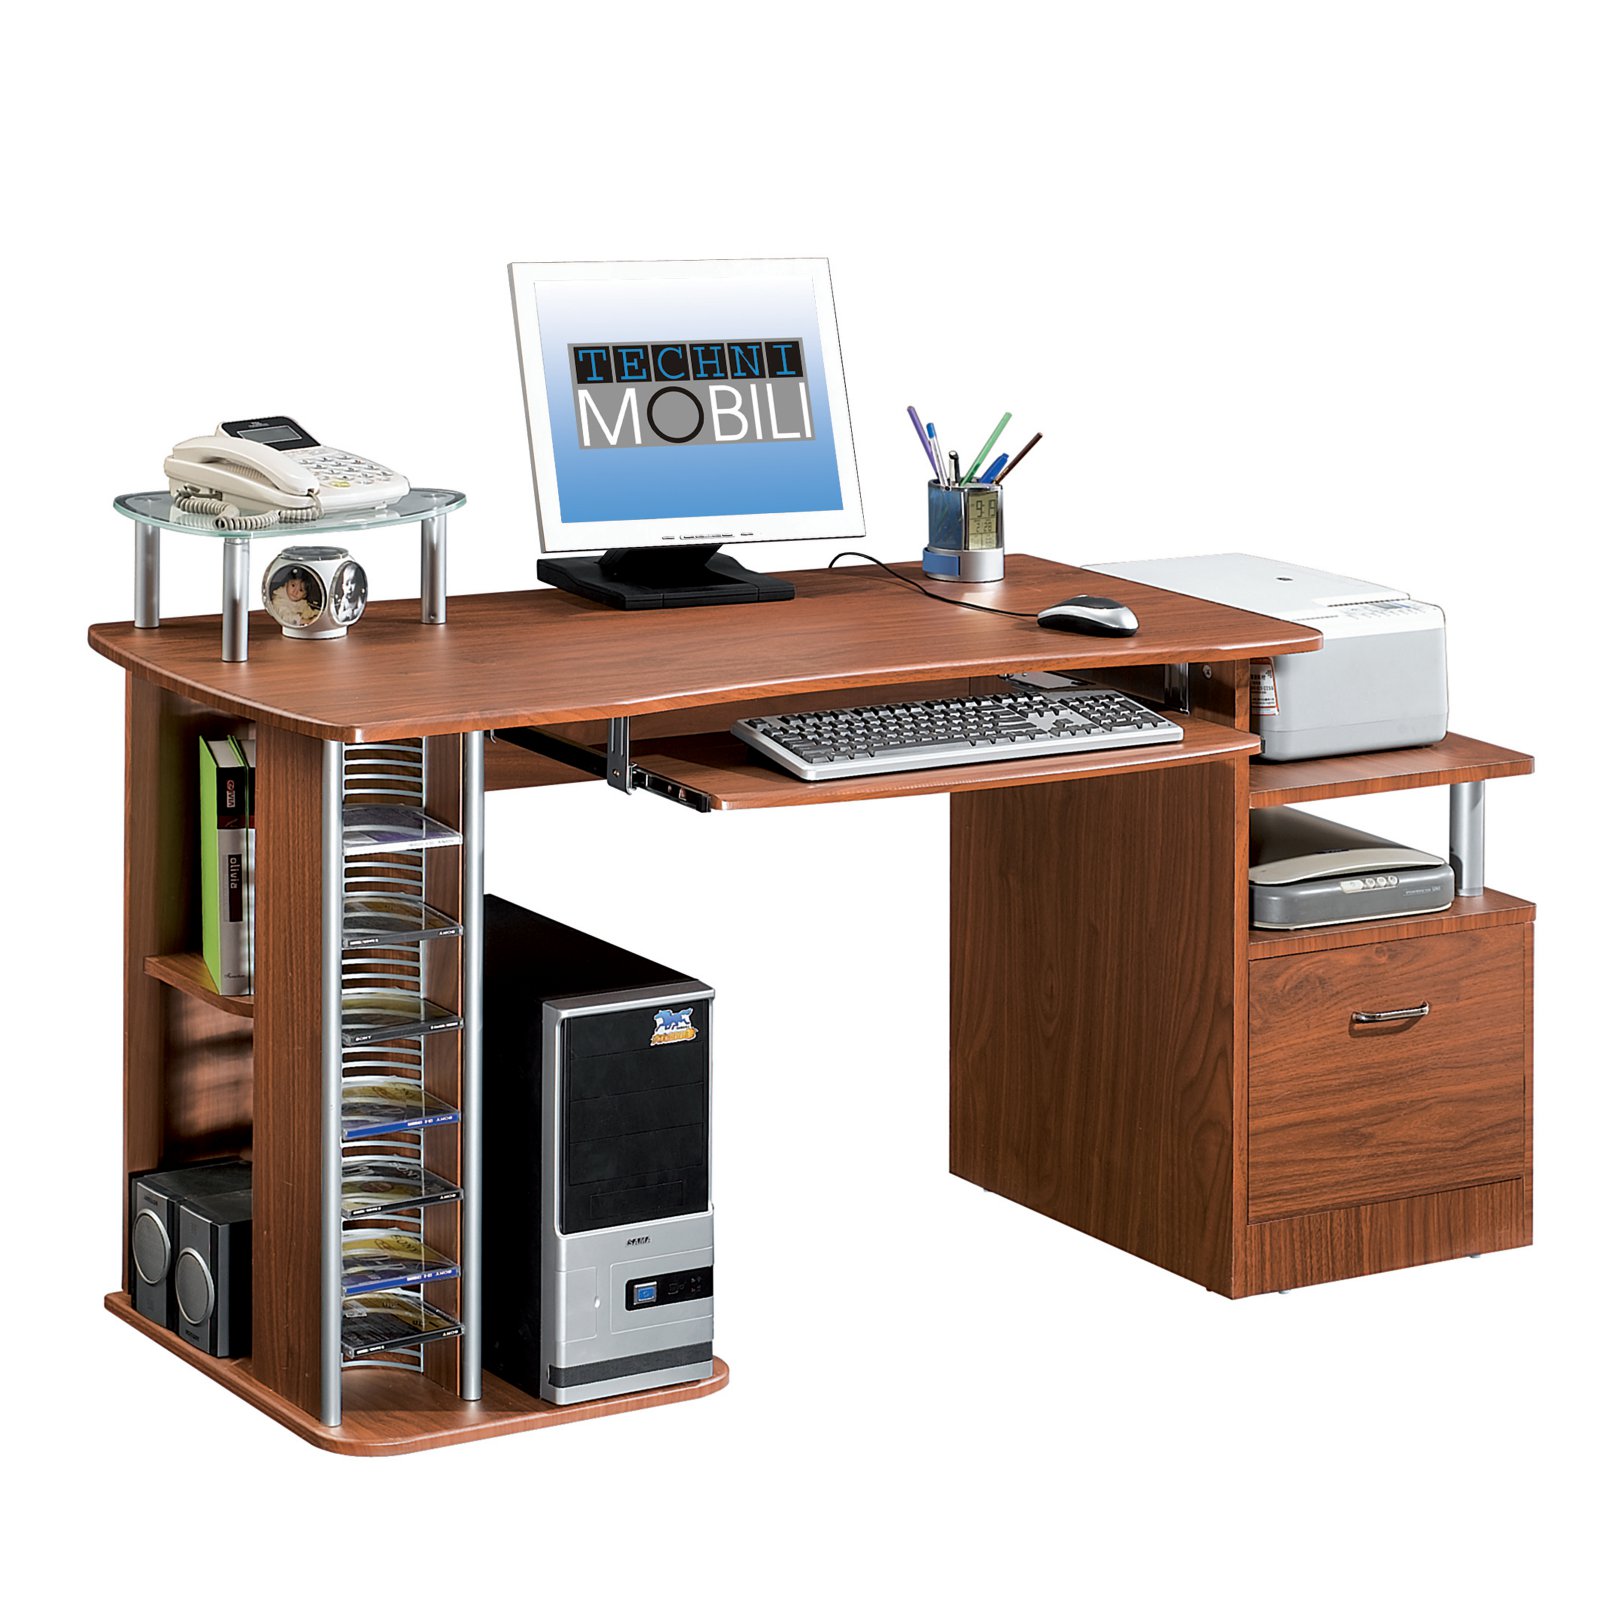 Techni Mobili Complete Computer Workstation Desk with Storage and Media Rack RTA-2202, Chocolate - image 3 of 4